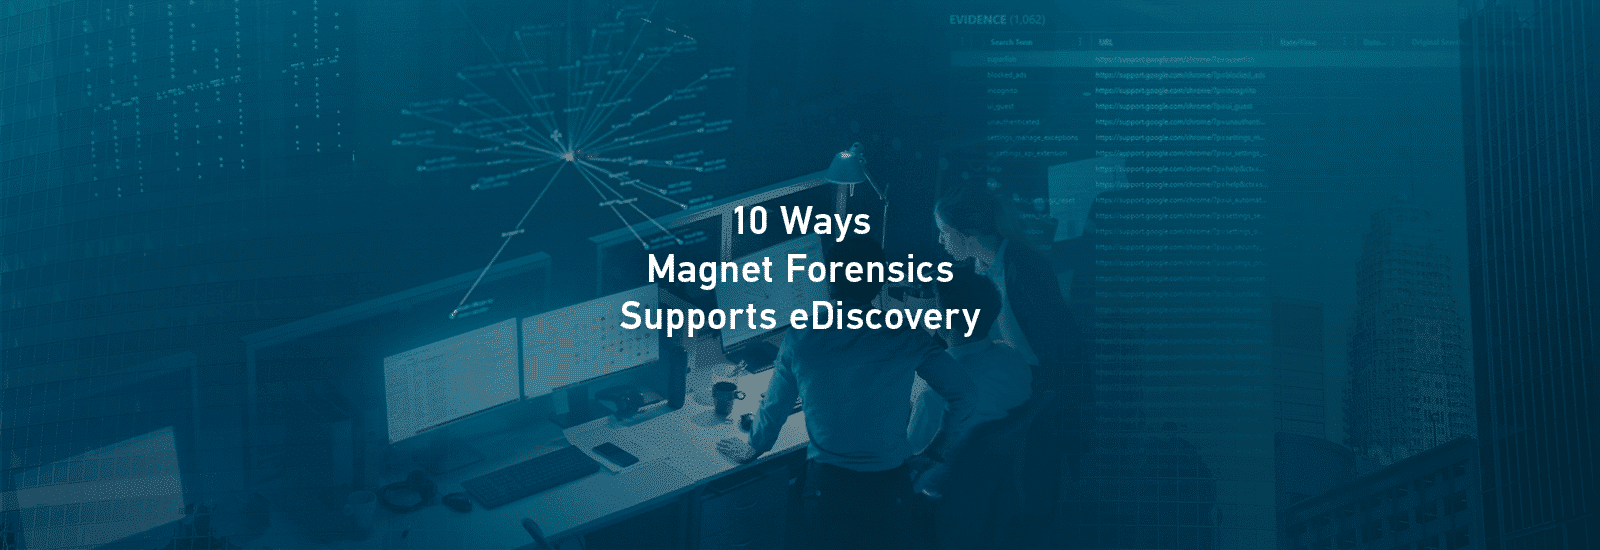 10 Ways Magnet Forensics Supports eDiscovery